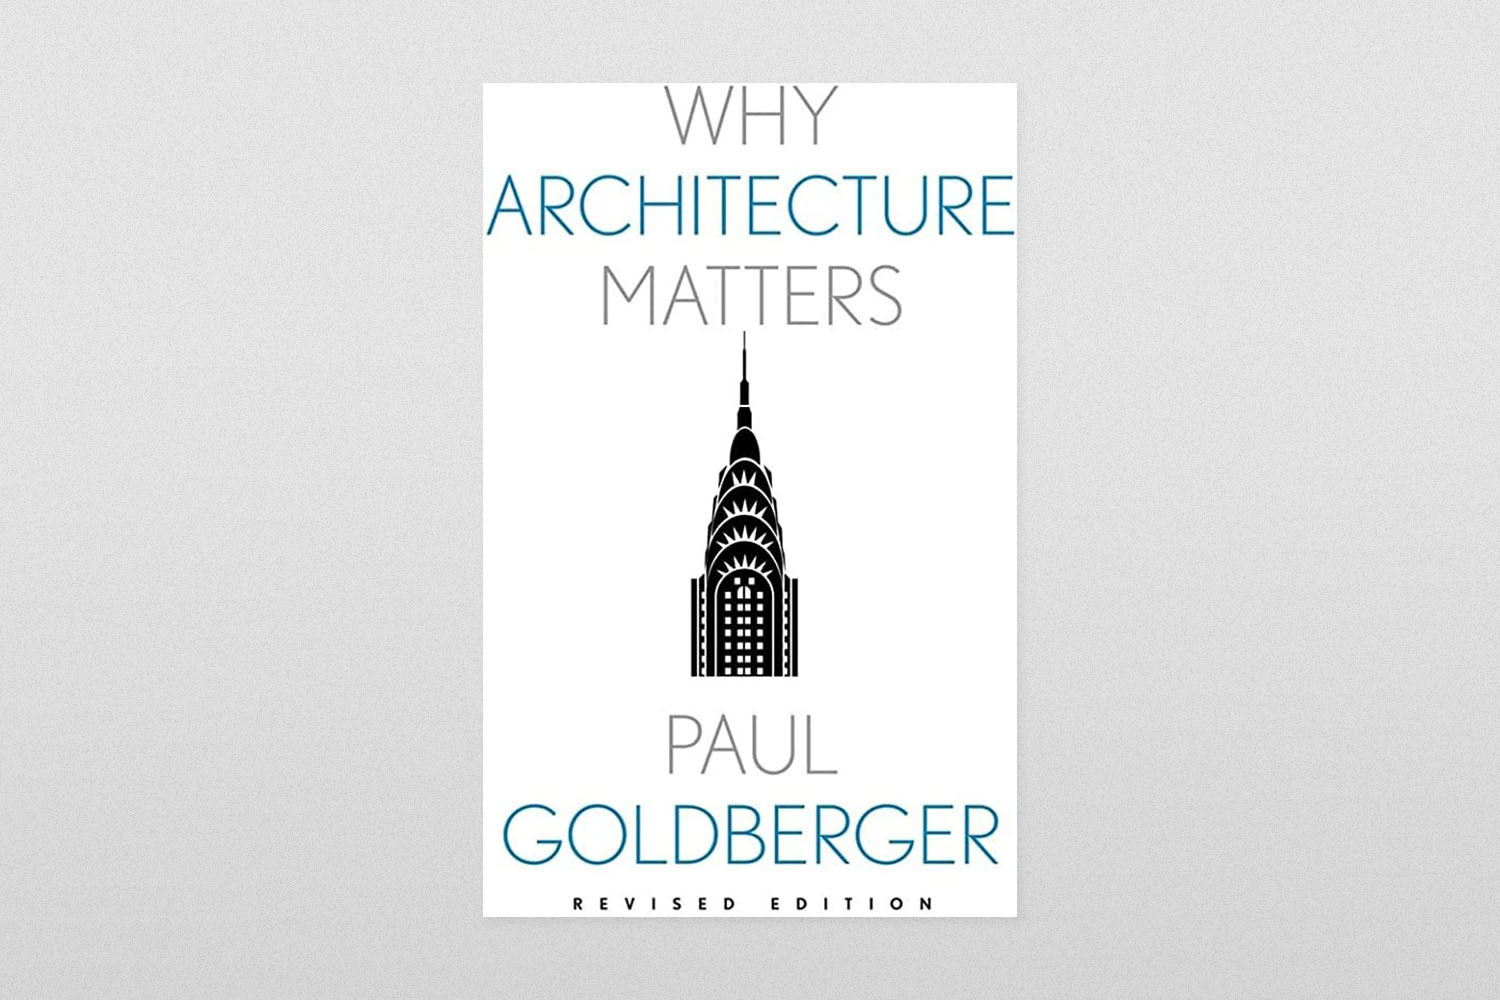 Why Architecture Matters (Revised), Paul Goldberger